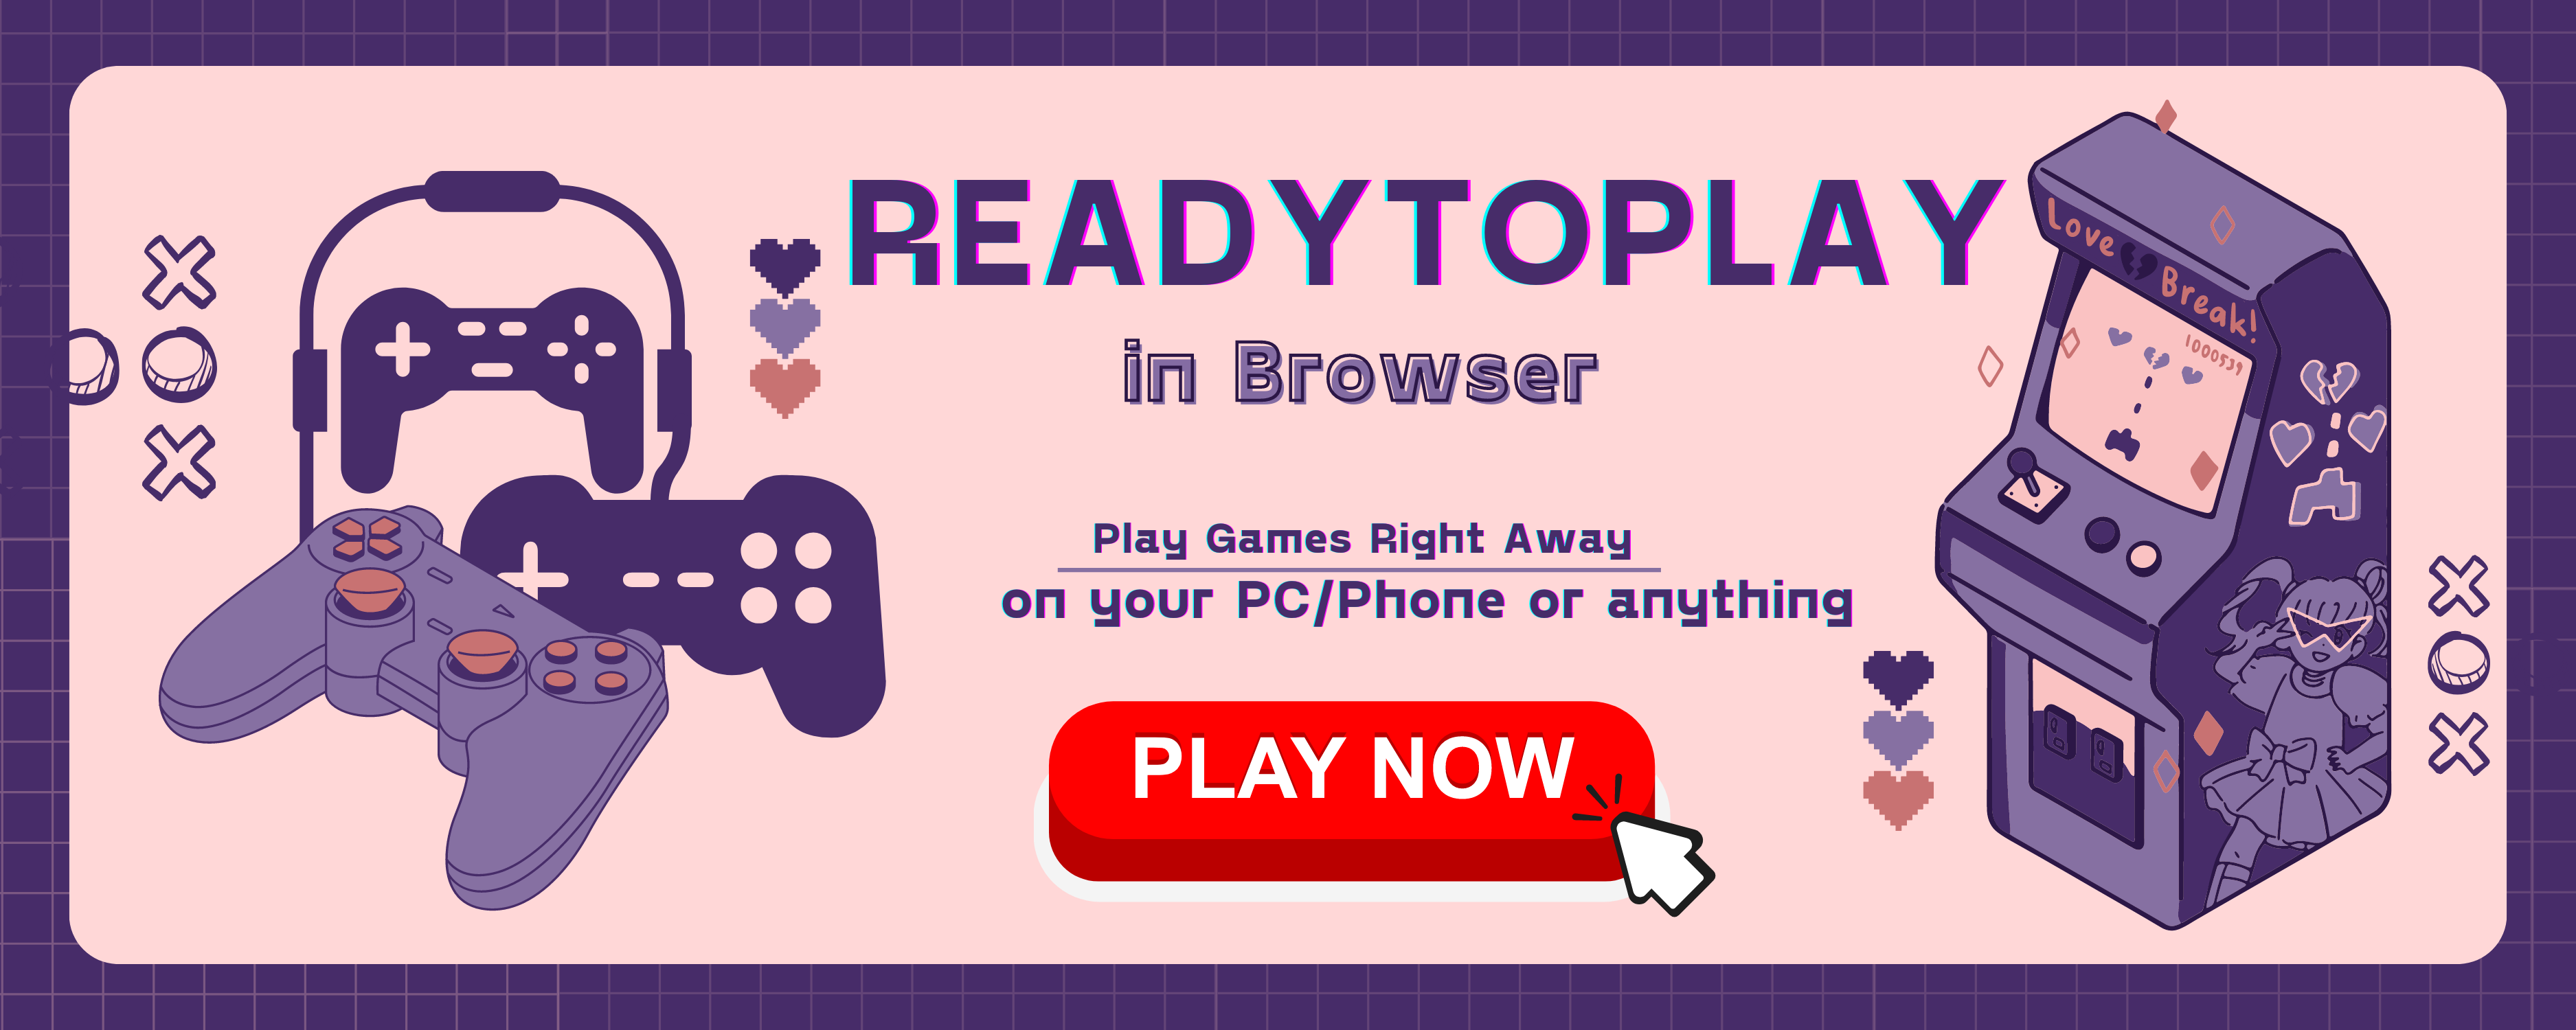 Ready To Play Games in Web Browser